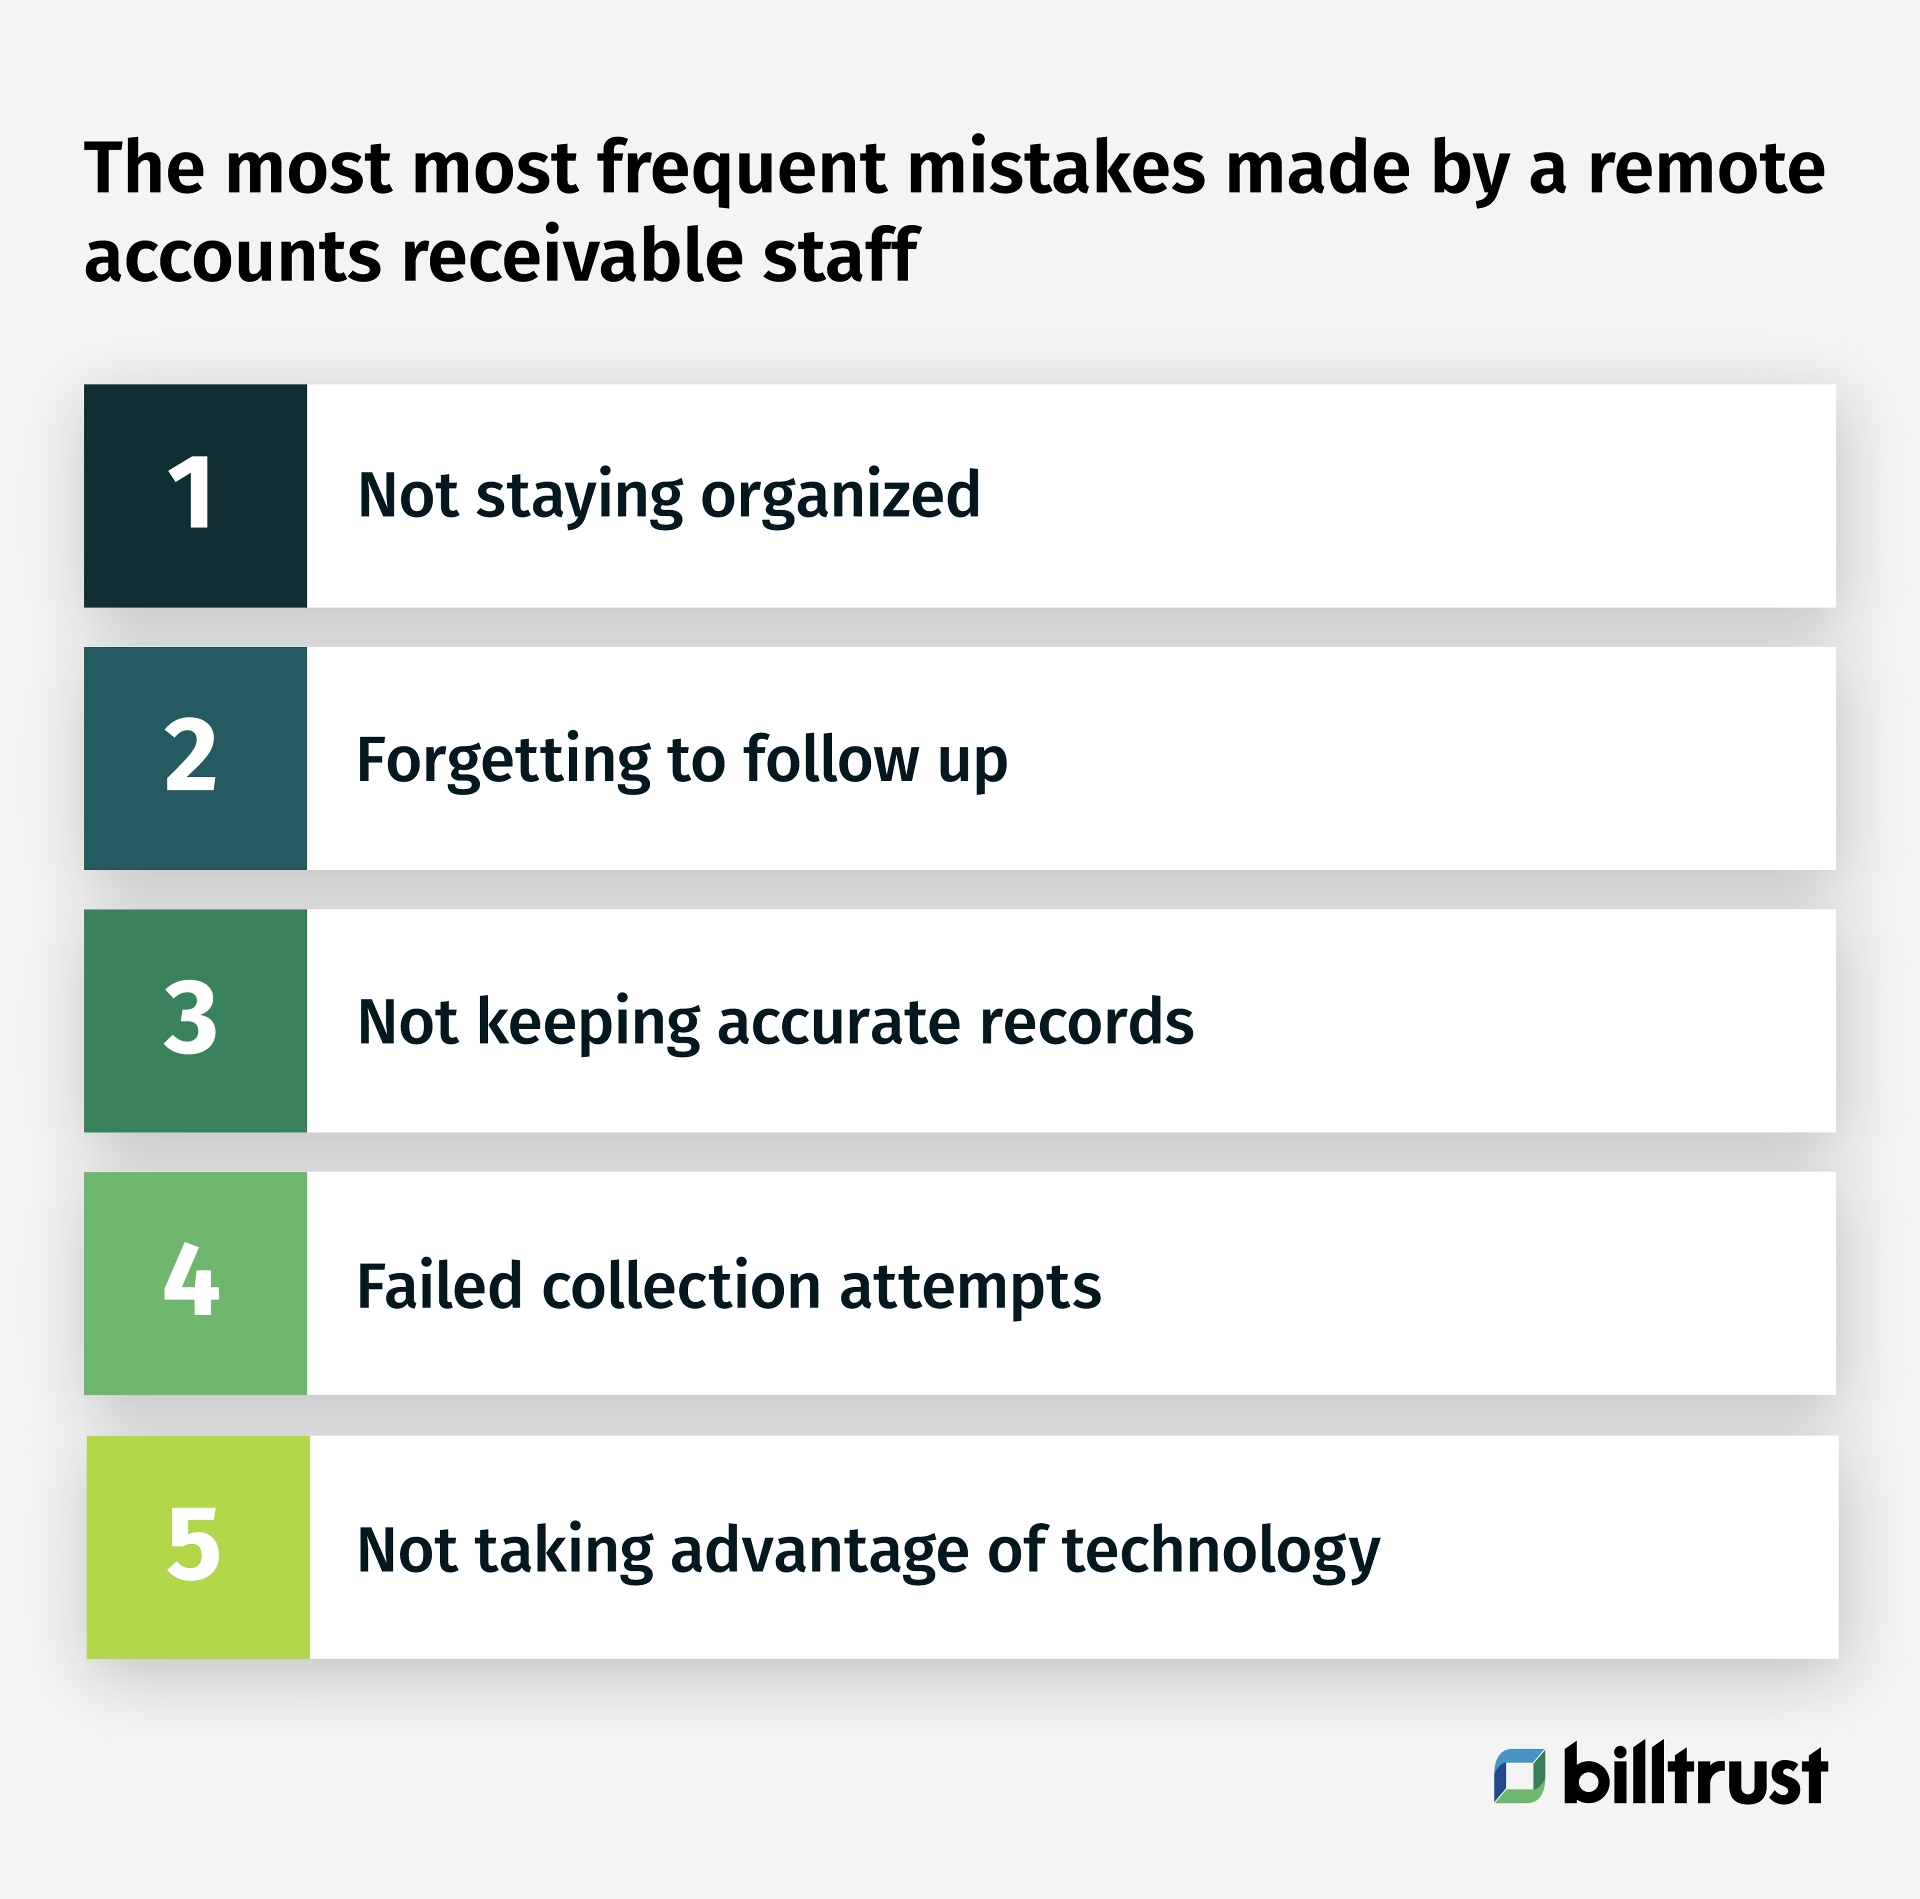 the most frequent mistakes made by a remote accounts receivable staff